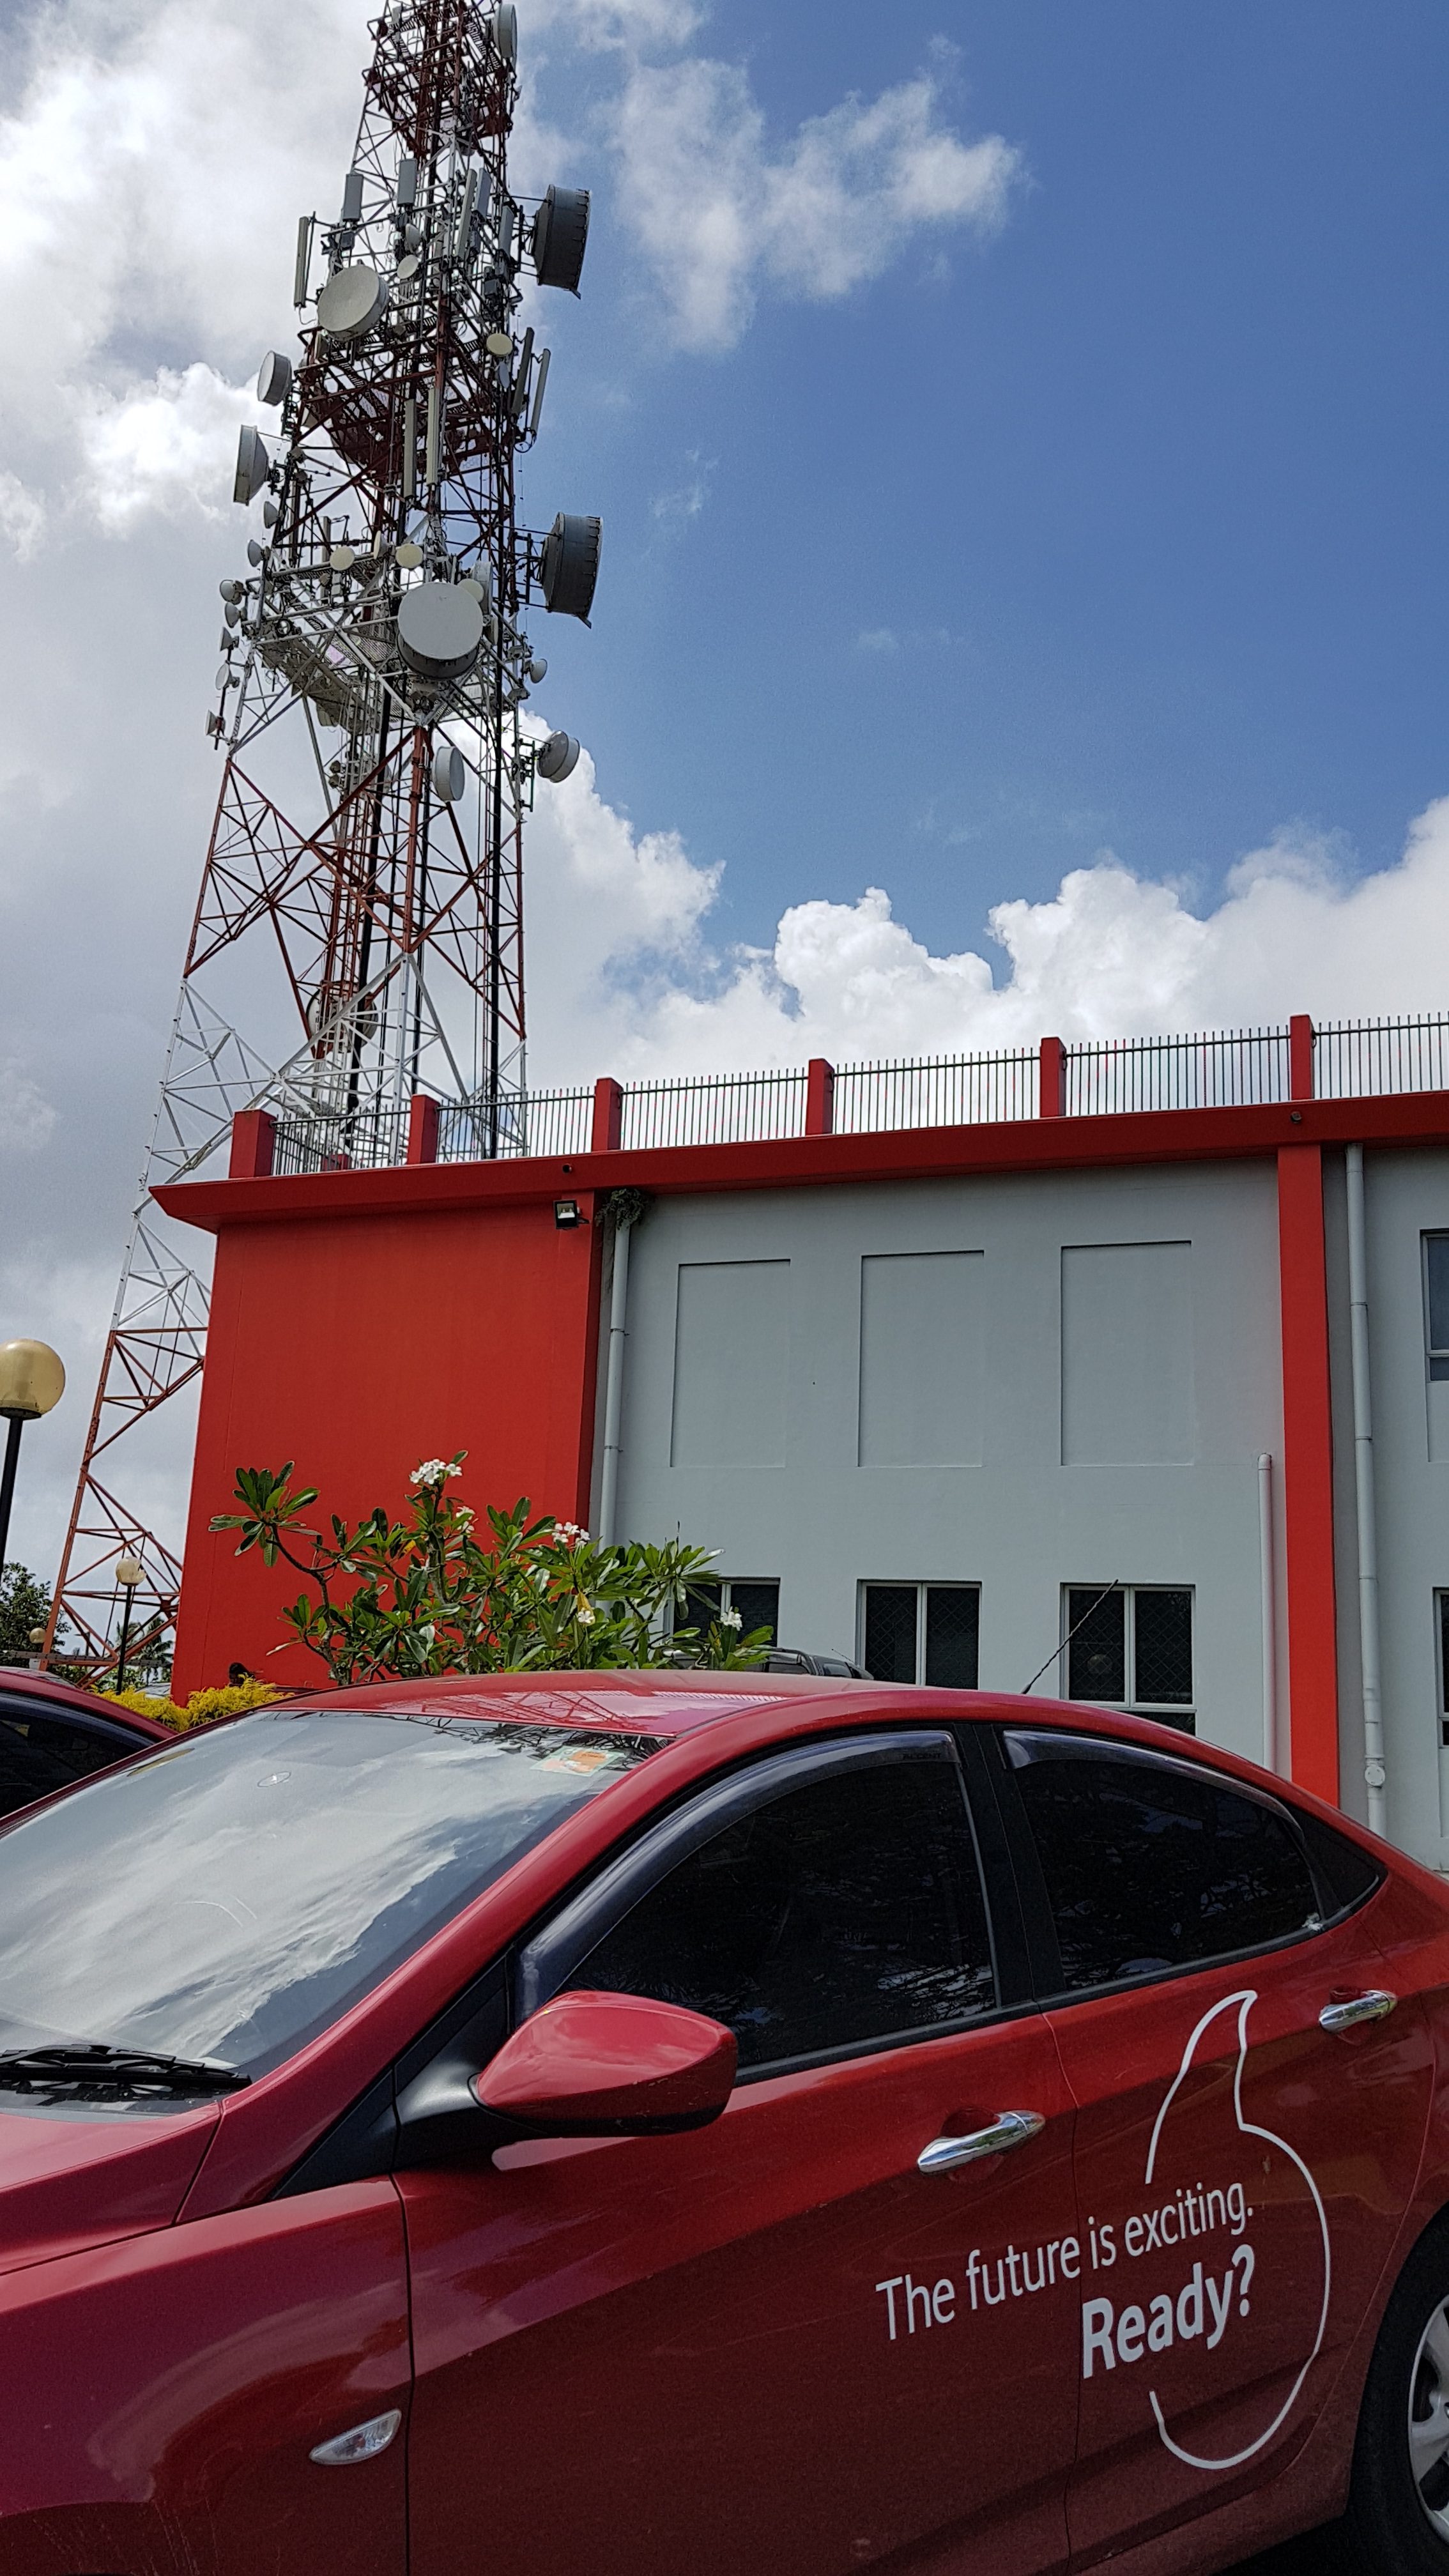 Vodafone Fiji is one of four ISPs connected to the newly established IXP.